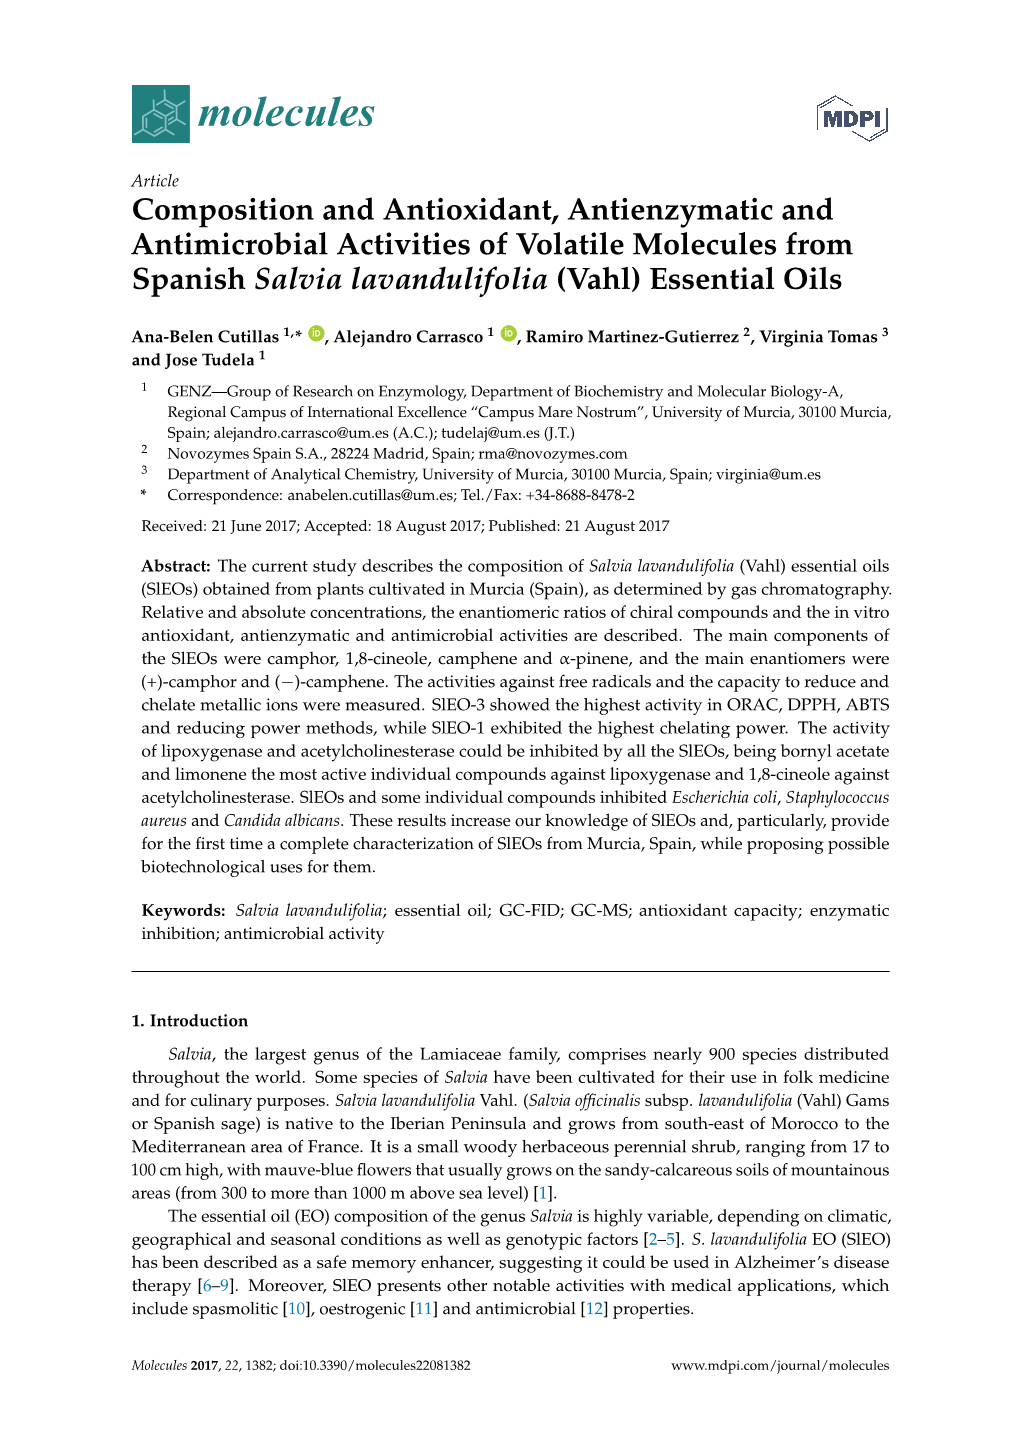 Composition and Antioxidant, Antienzymatic and Antimicrobial Activities of Volatile Molecules from Spanish Salvia Lavandulifolia (Vahl) Essential Oils